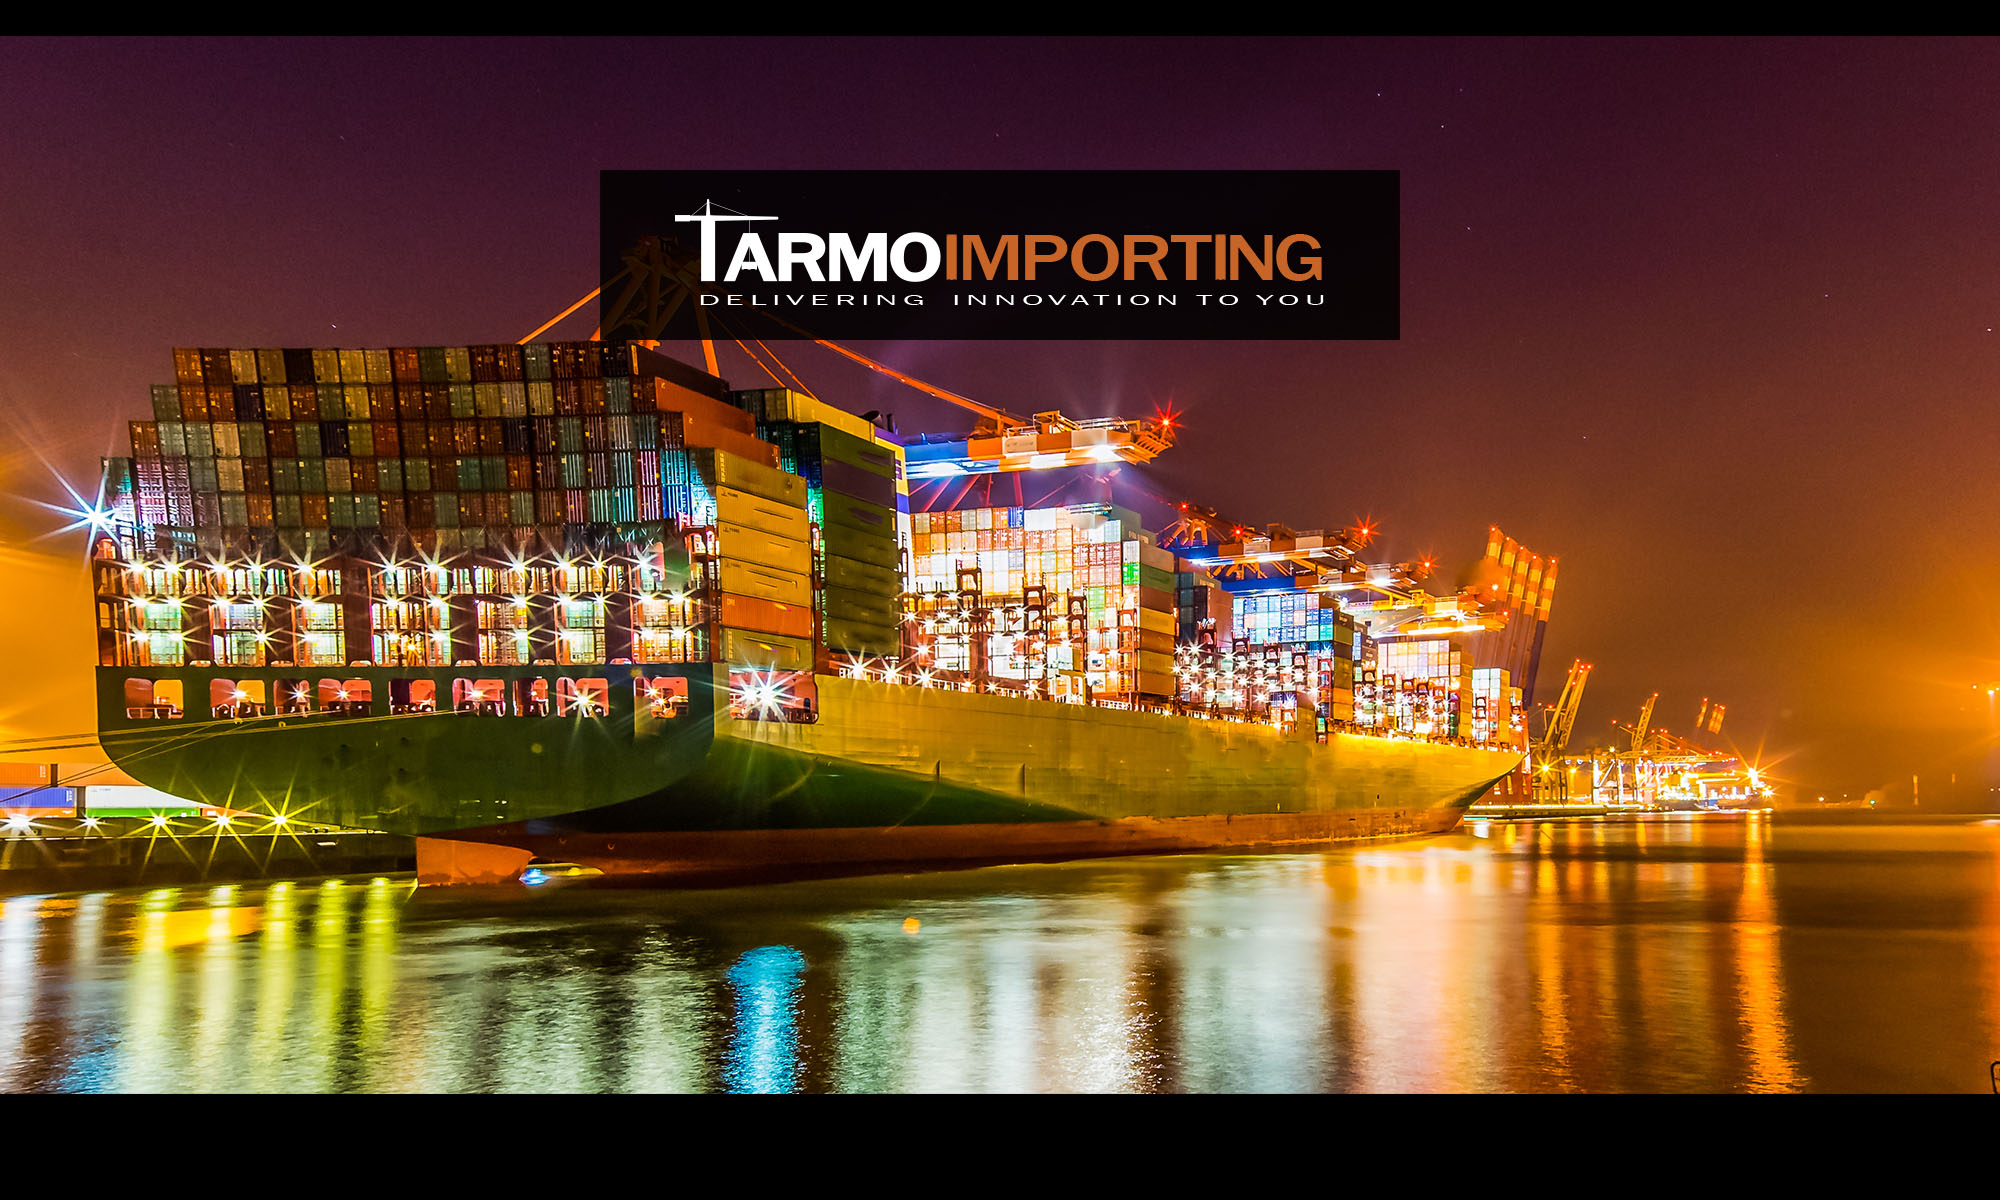 Tarmo Importing - Delivering Innovation to you